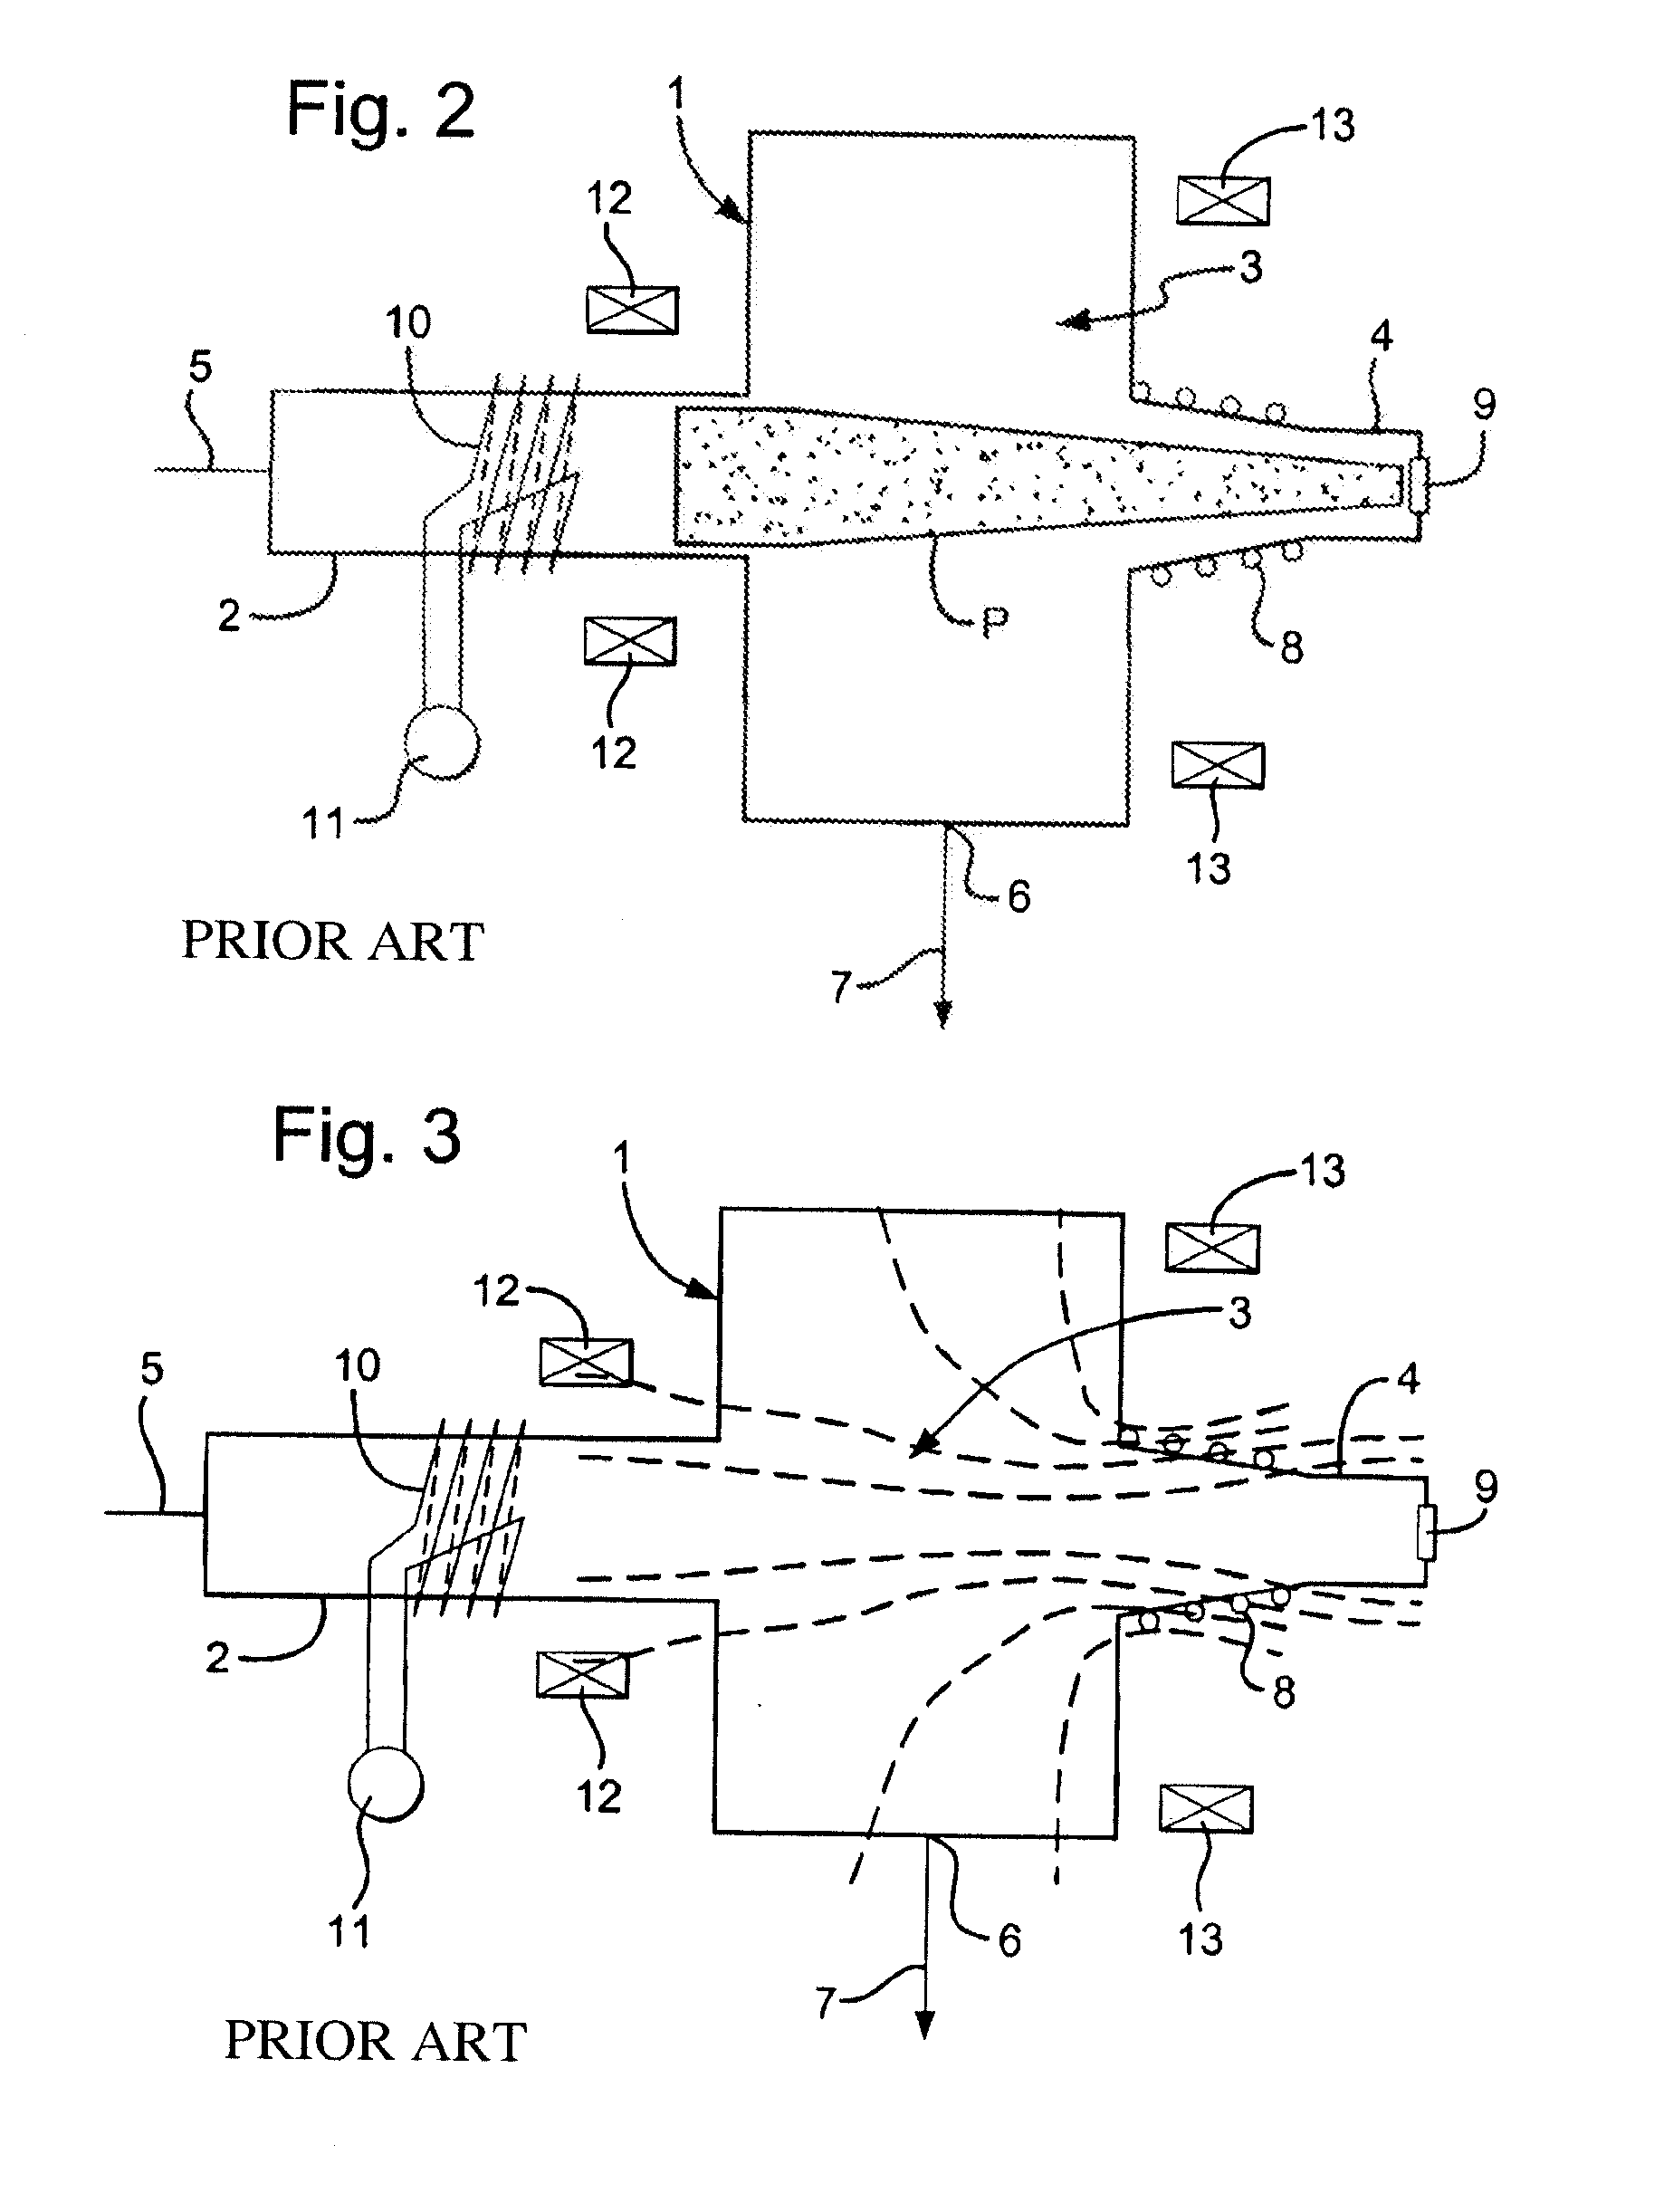 Dielectric deposition using a remote plasma source